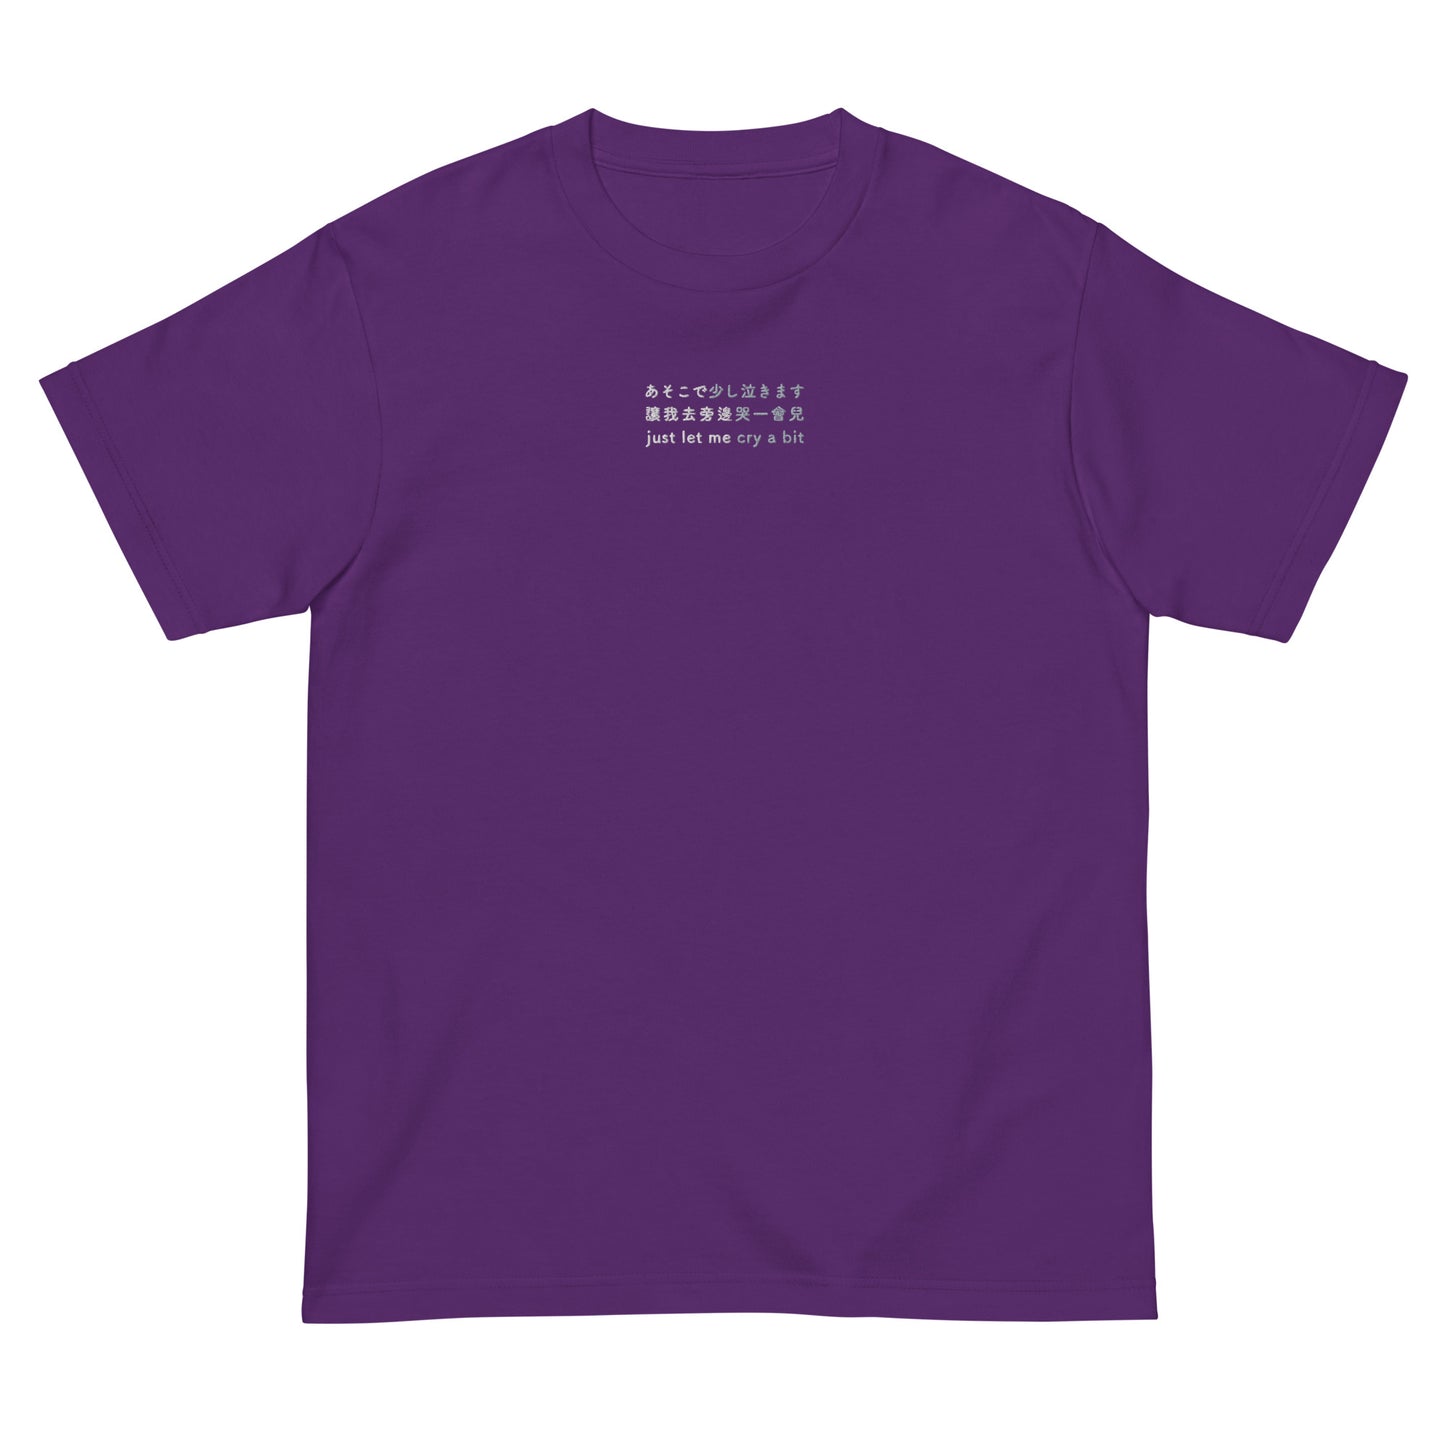 Purple High Quality Tee - Front Design with an White,Light Gray Embroidery "Just Let Me Cry A Bit" in Japanese,Chinese and English